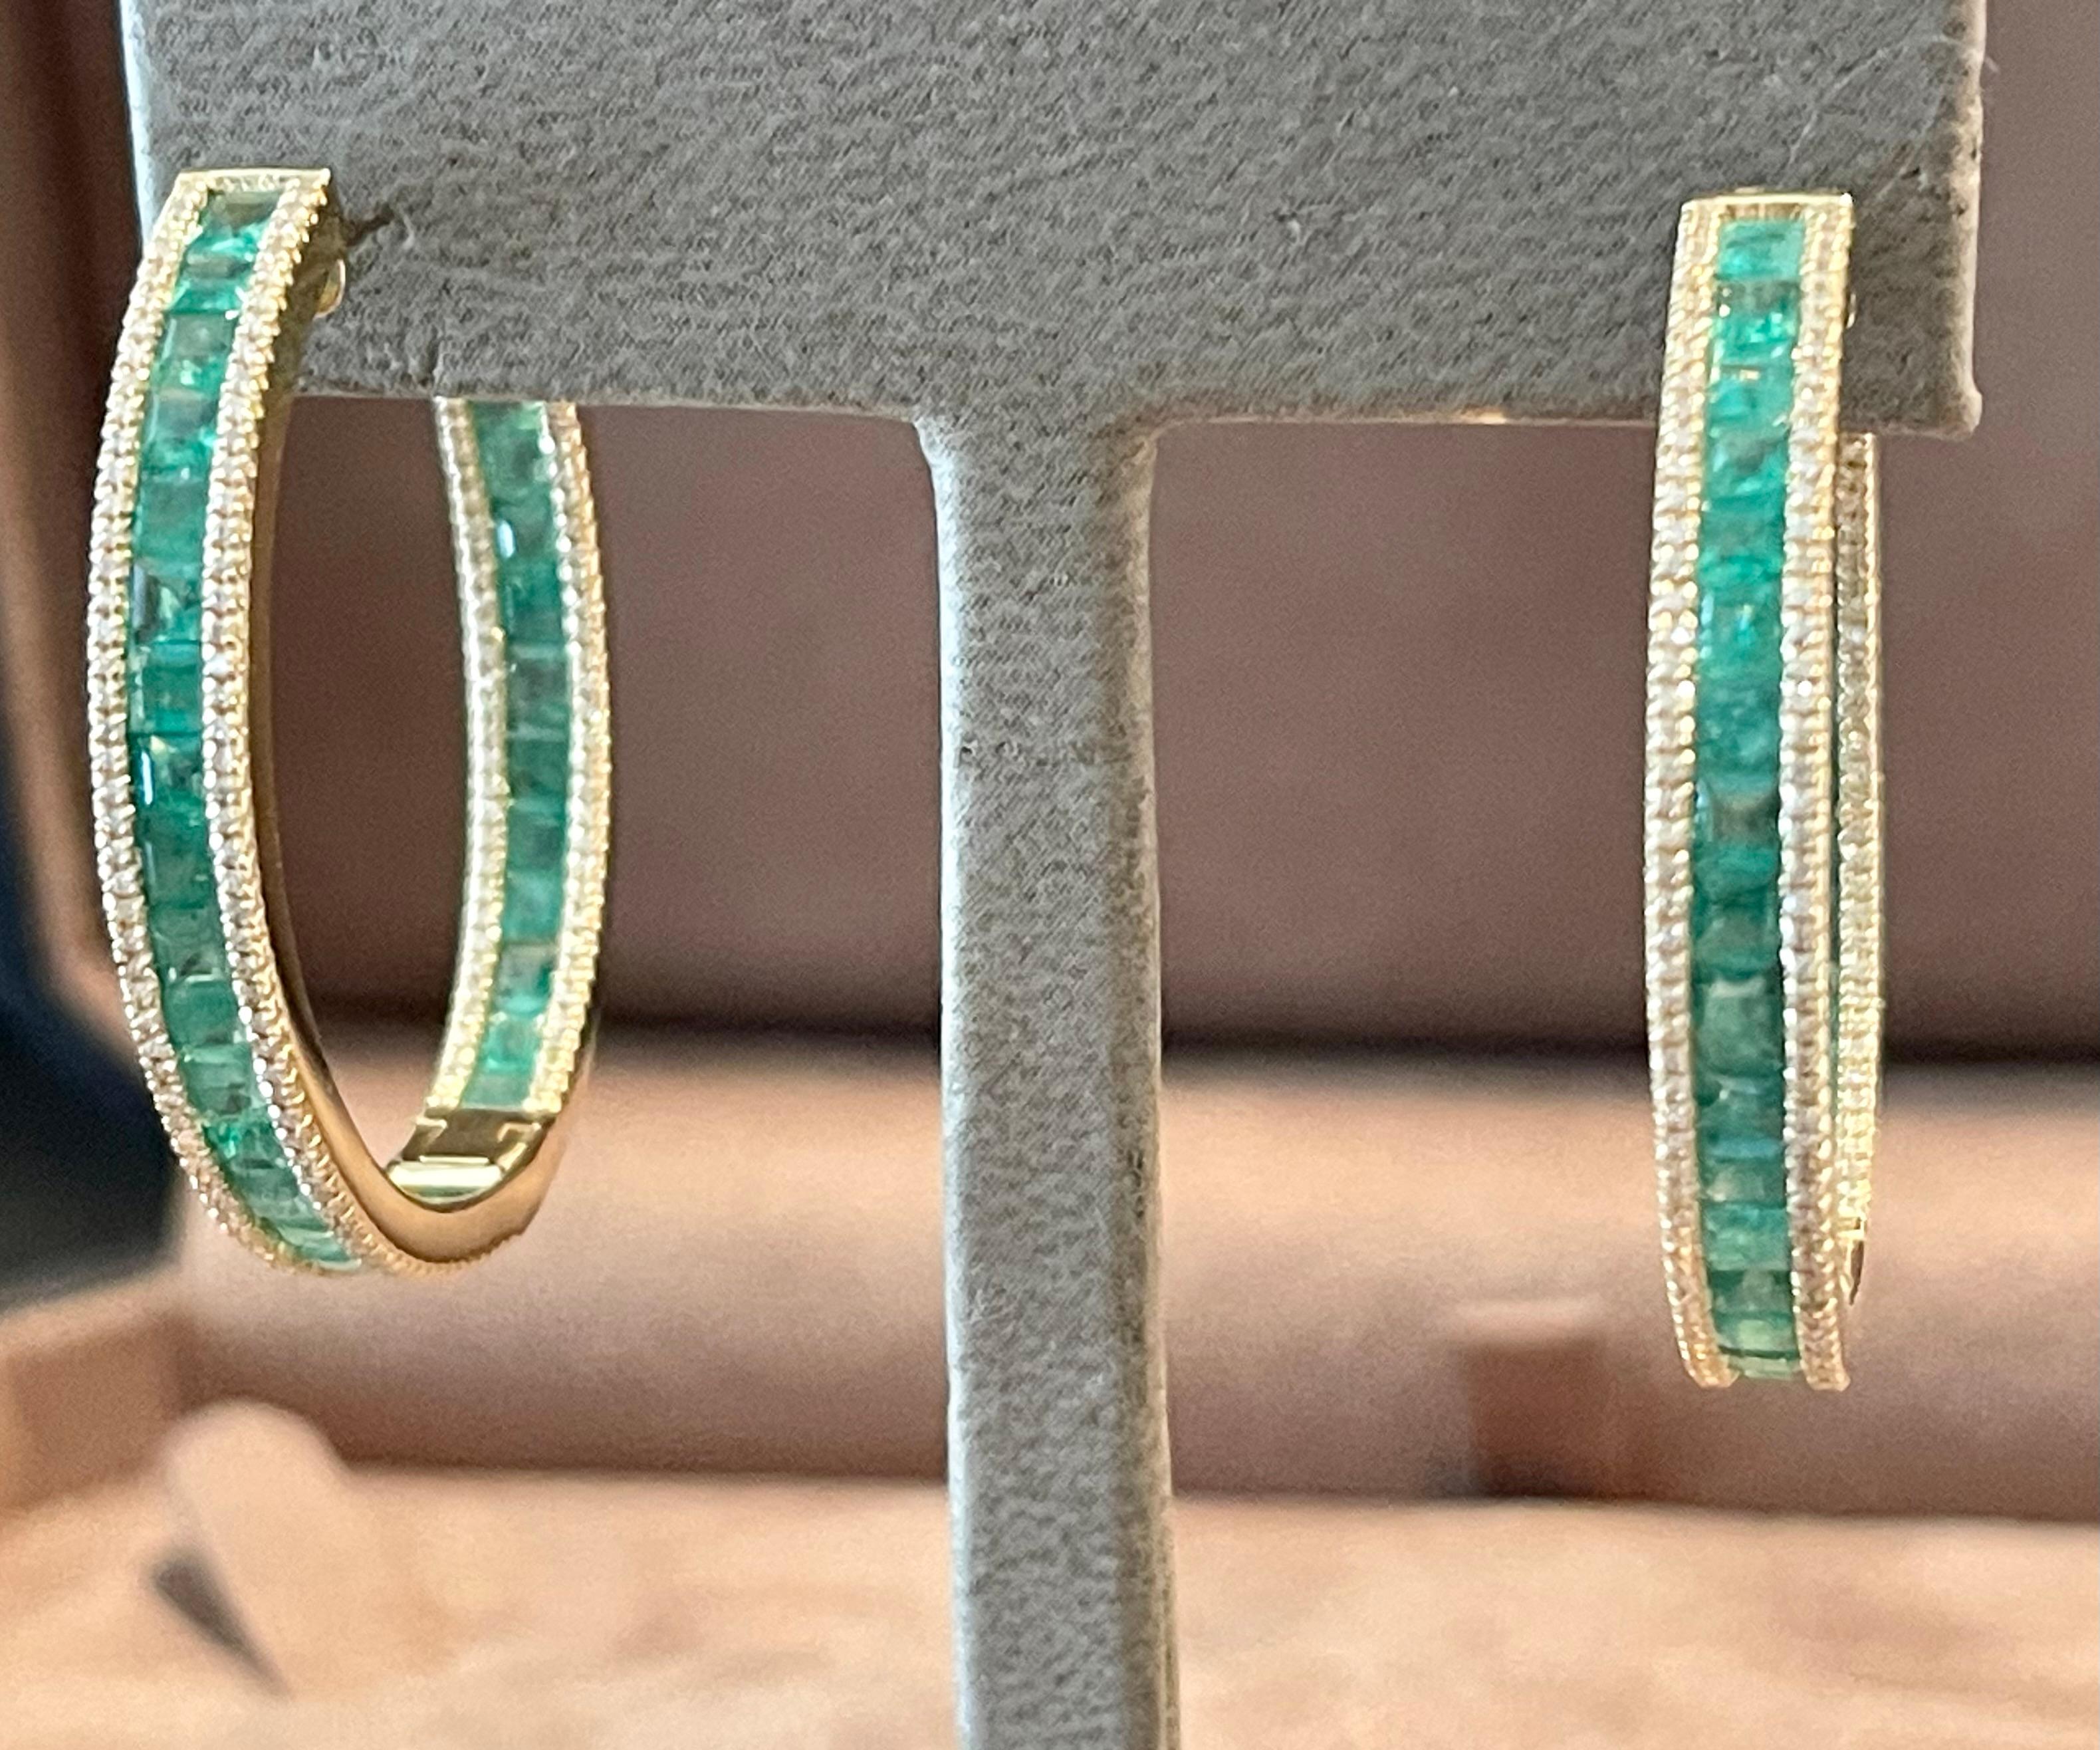 These beatiful inside out hoop earrings are cast in 18 K yellow Gold and are hand set with 69 emearld cut Emeralds with a total weight of 5.70 ct and 392 sparkling brilliant cut Diamonds weighing 0.54 ct. 
They are 3.70 cm long and 0.46 cm wide.